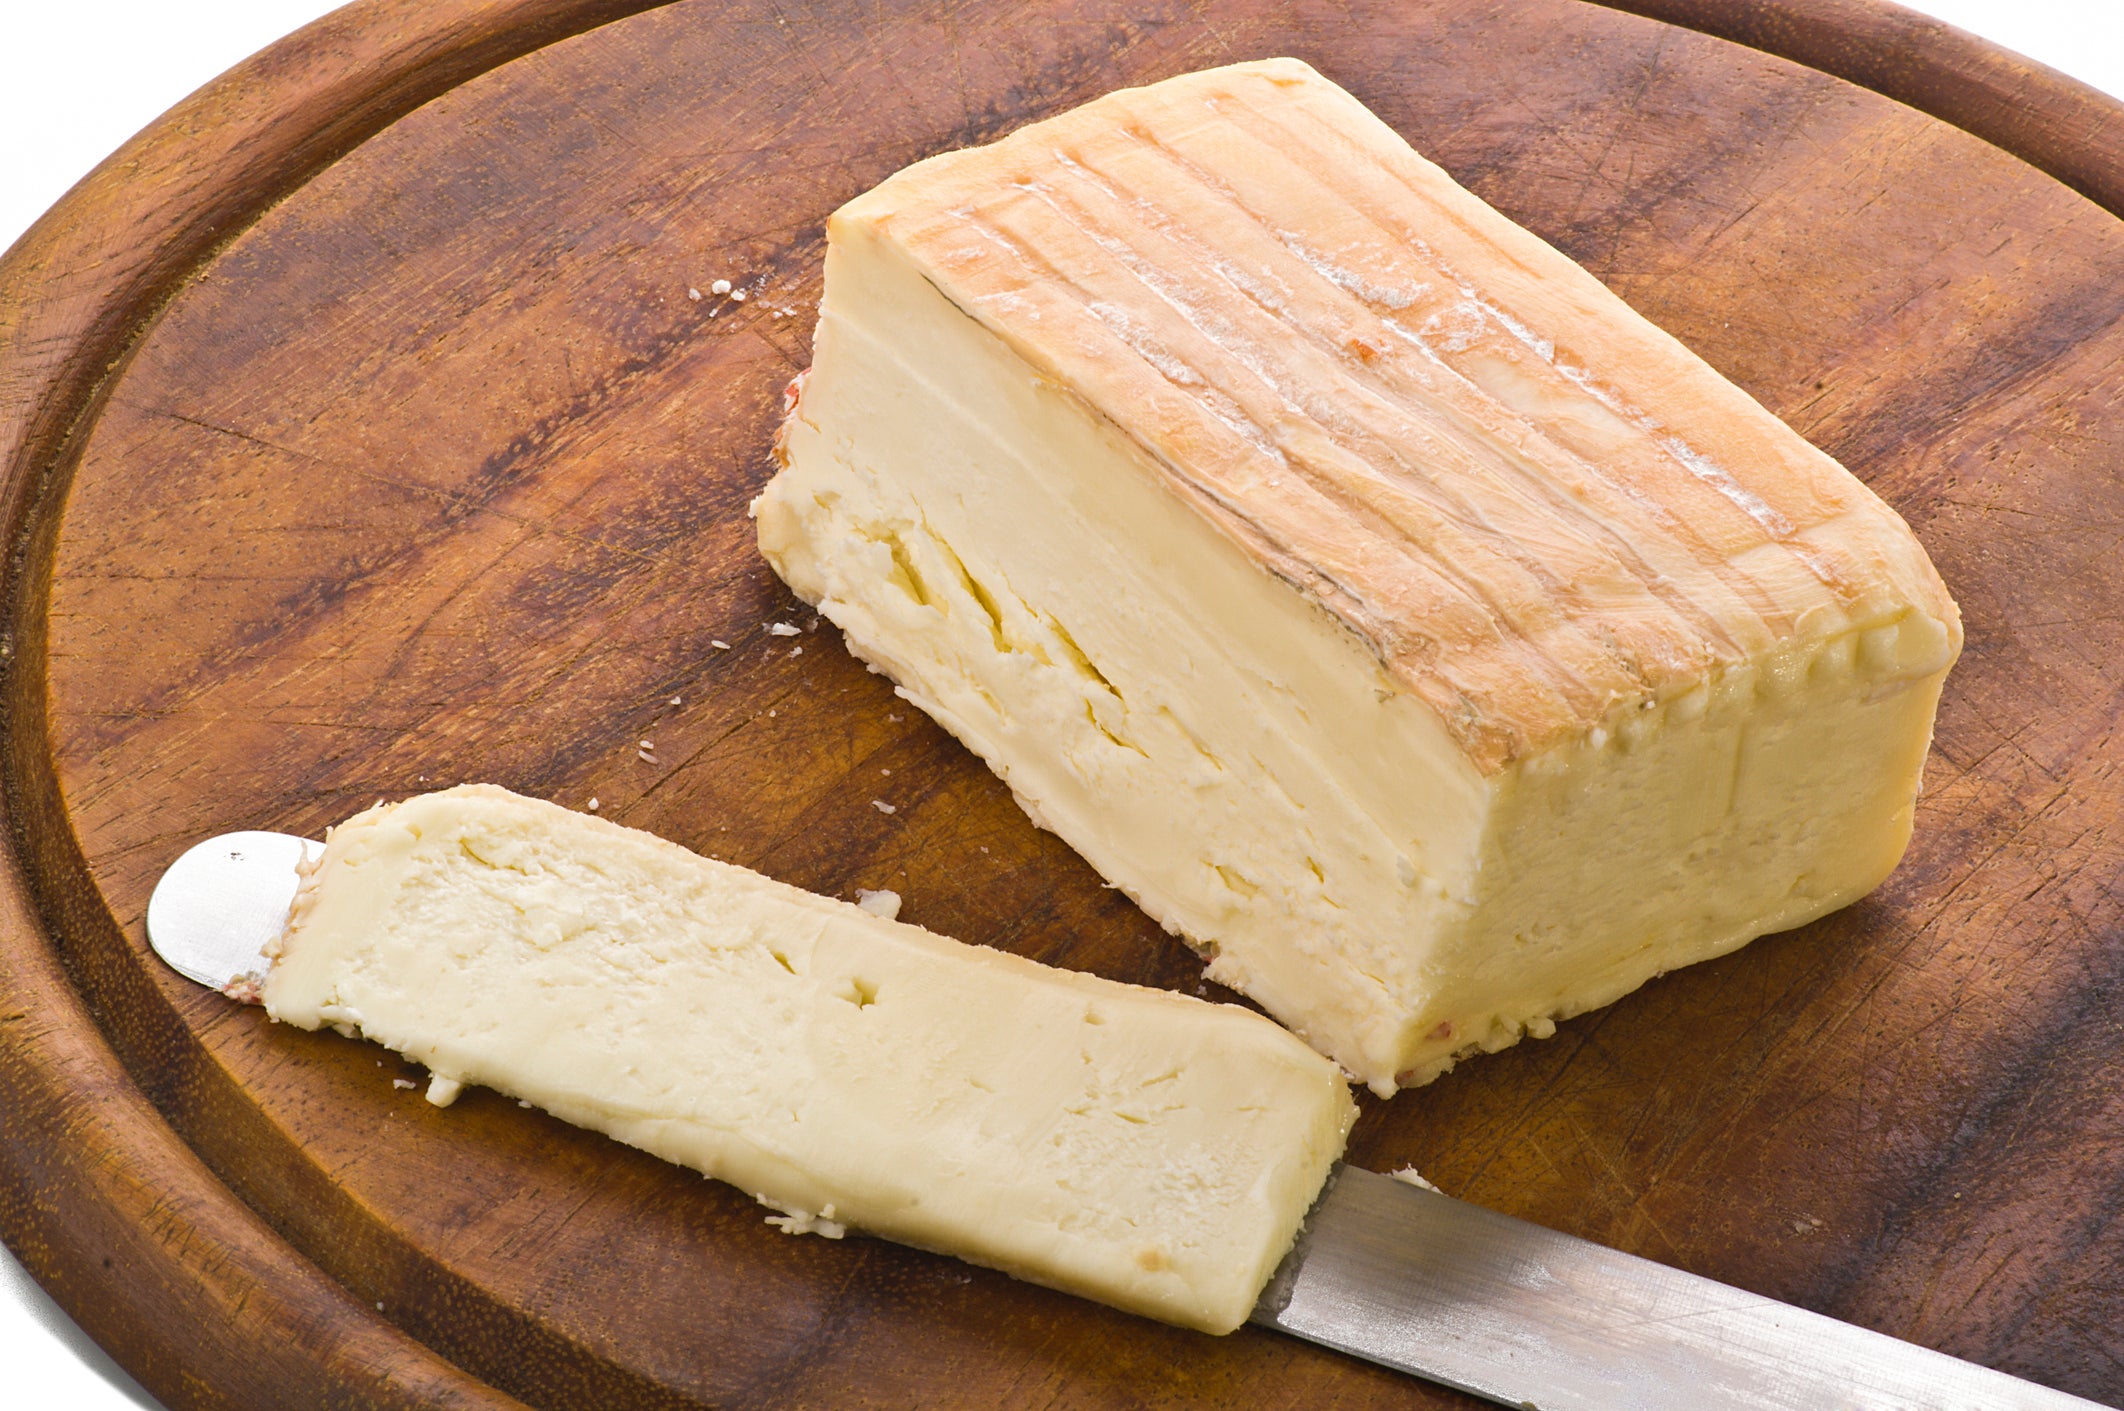 Morrisons has recalled its The Best Taleggio cheese due to bacteria concerns